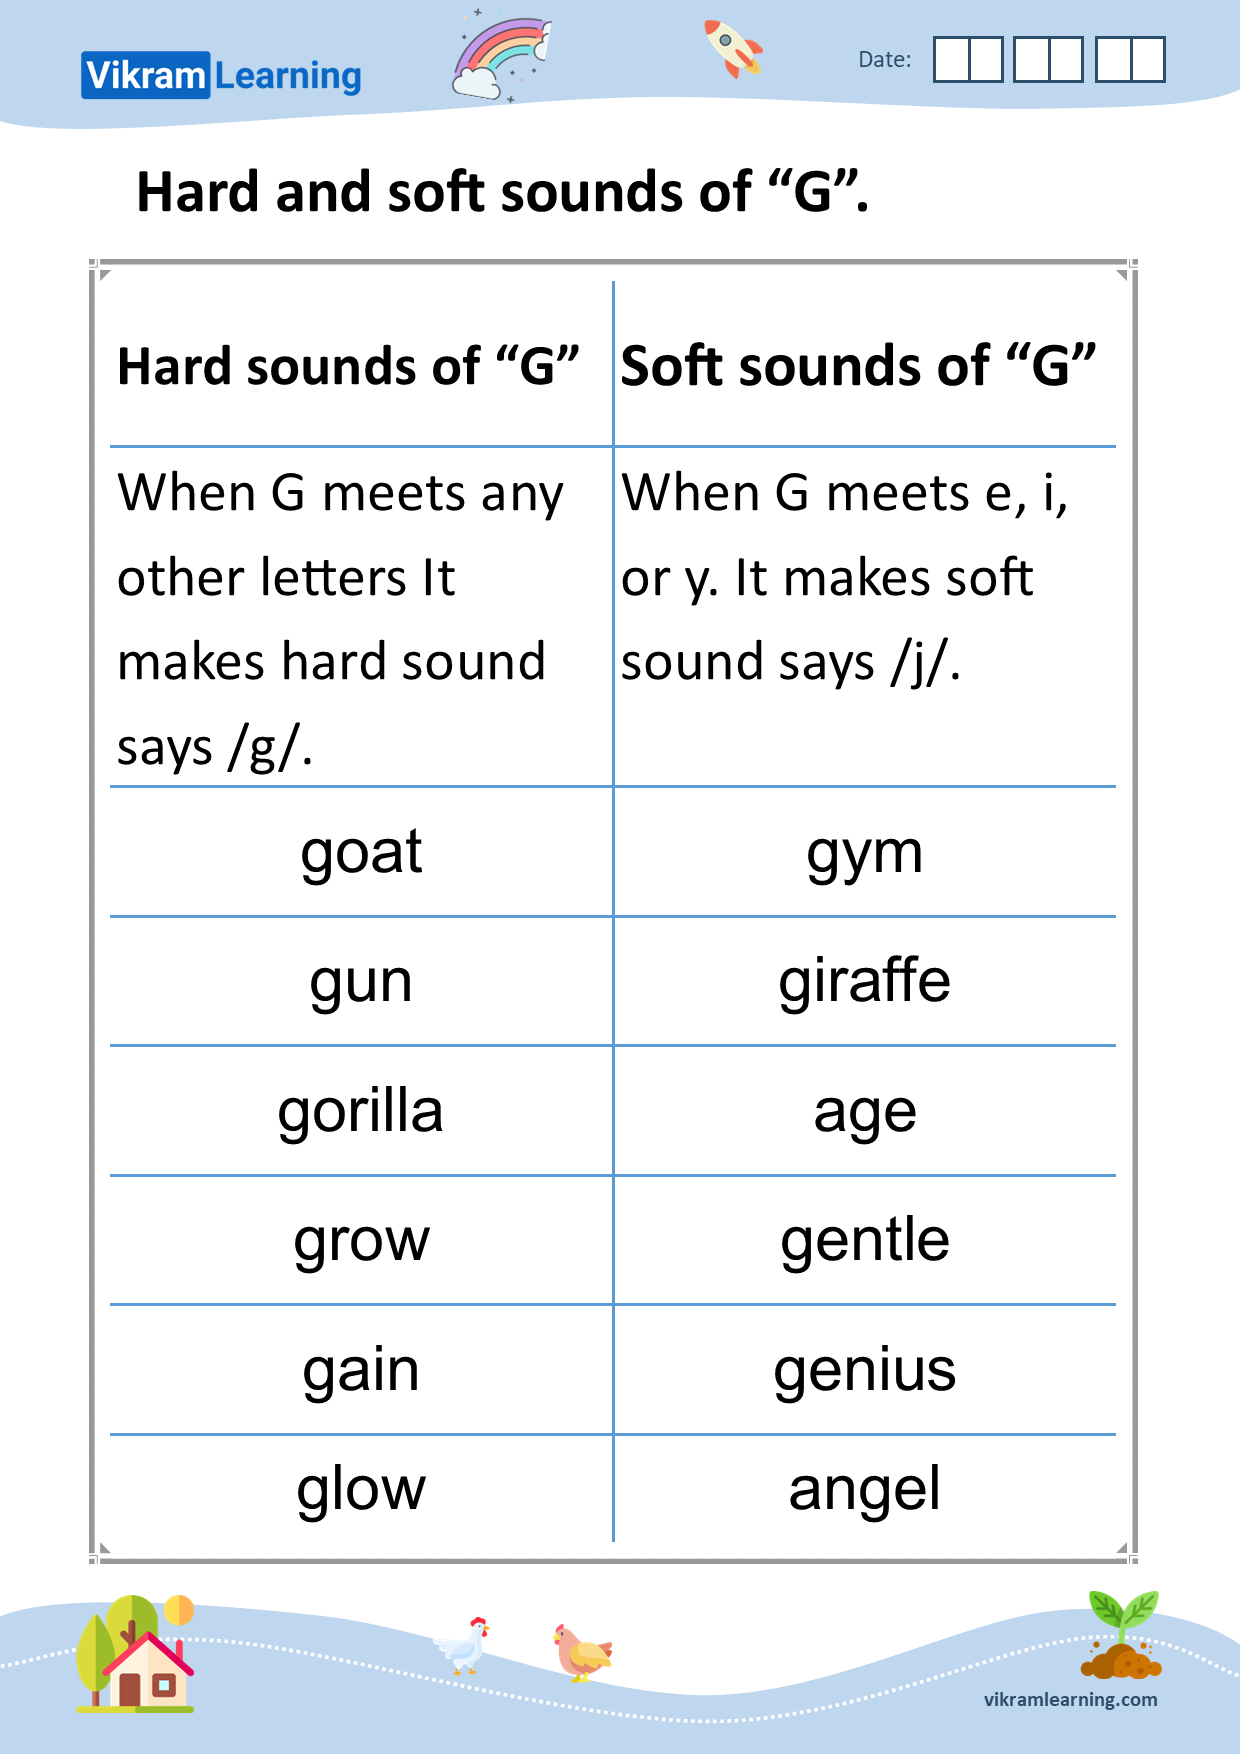 Download hard and soft sounds of g worksheets